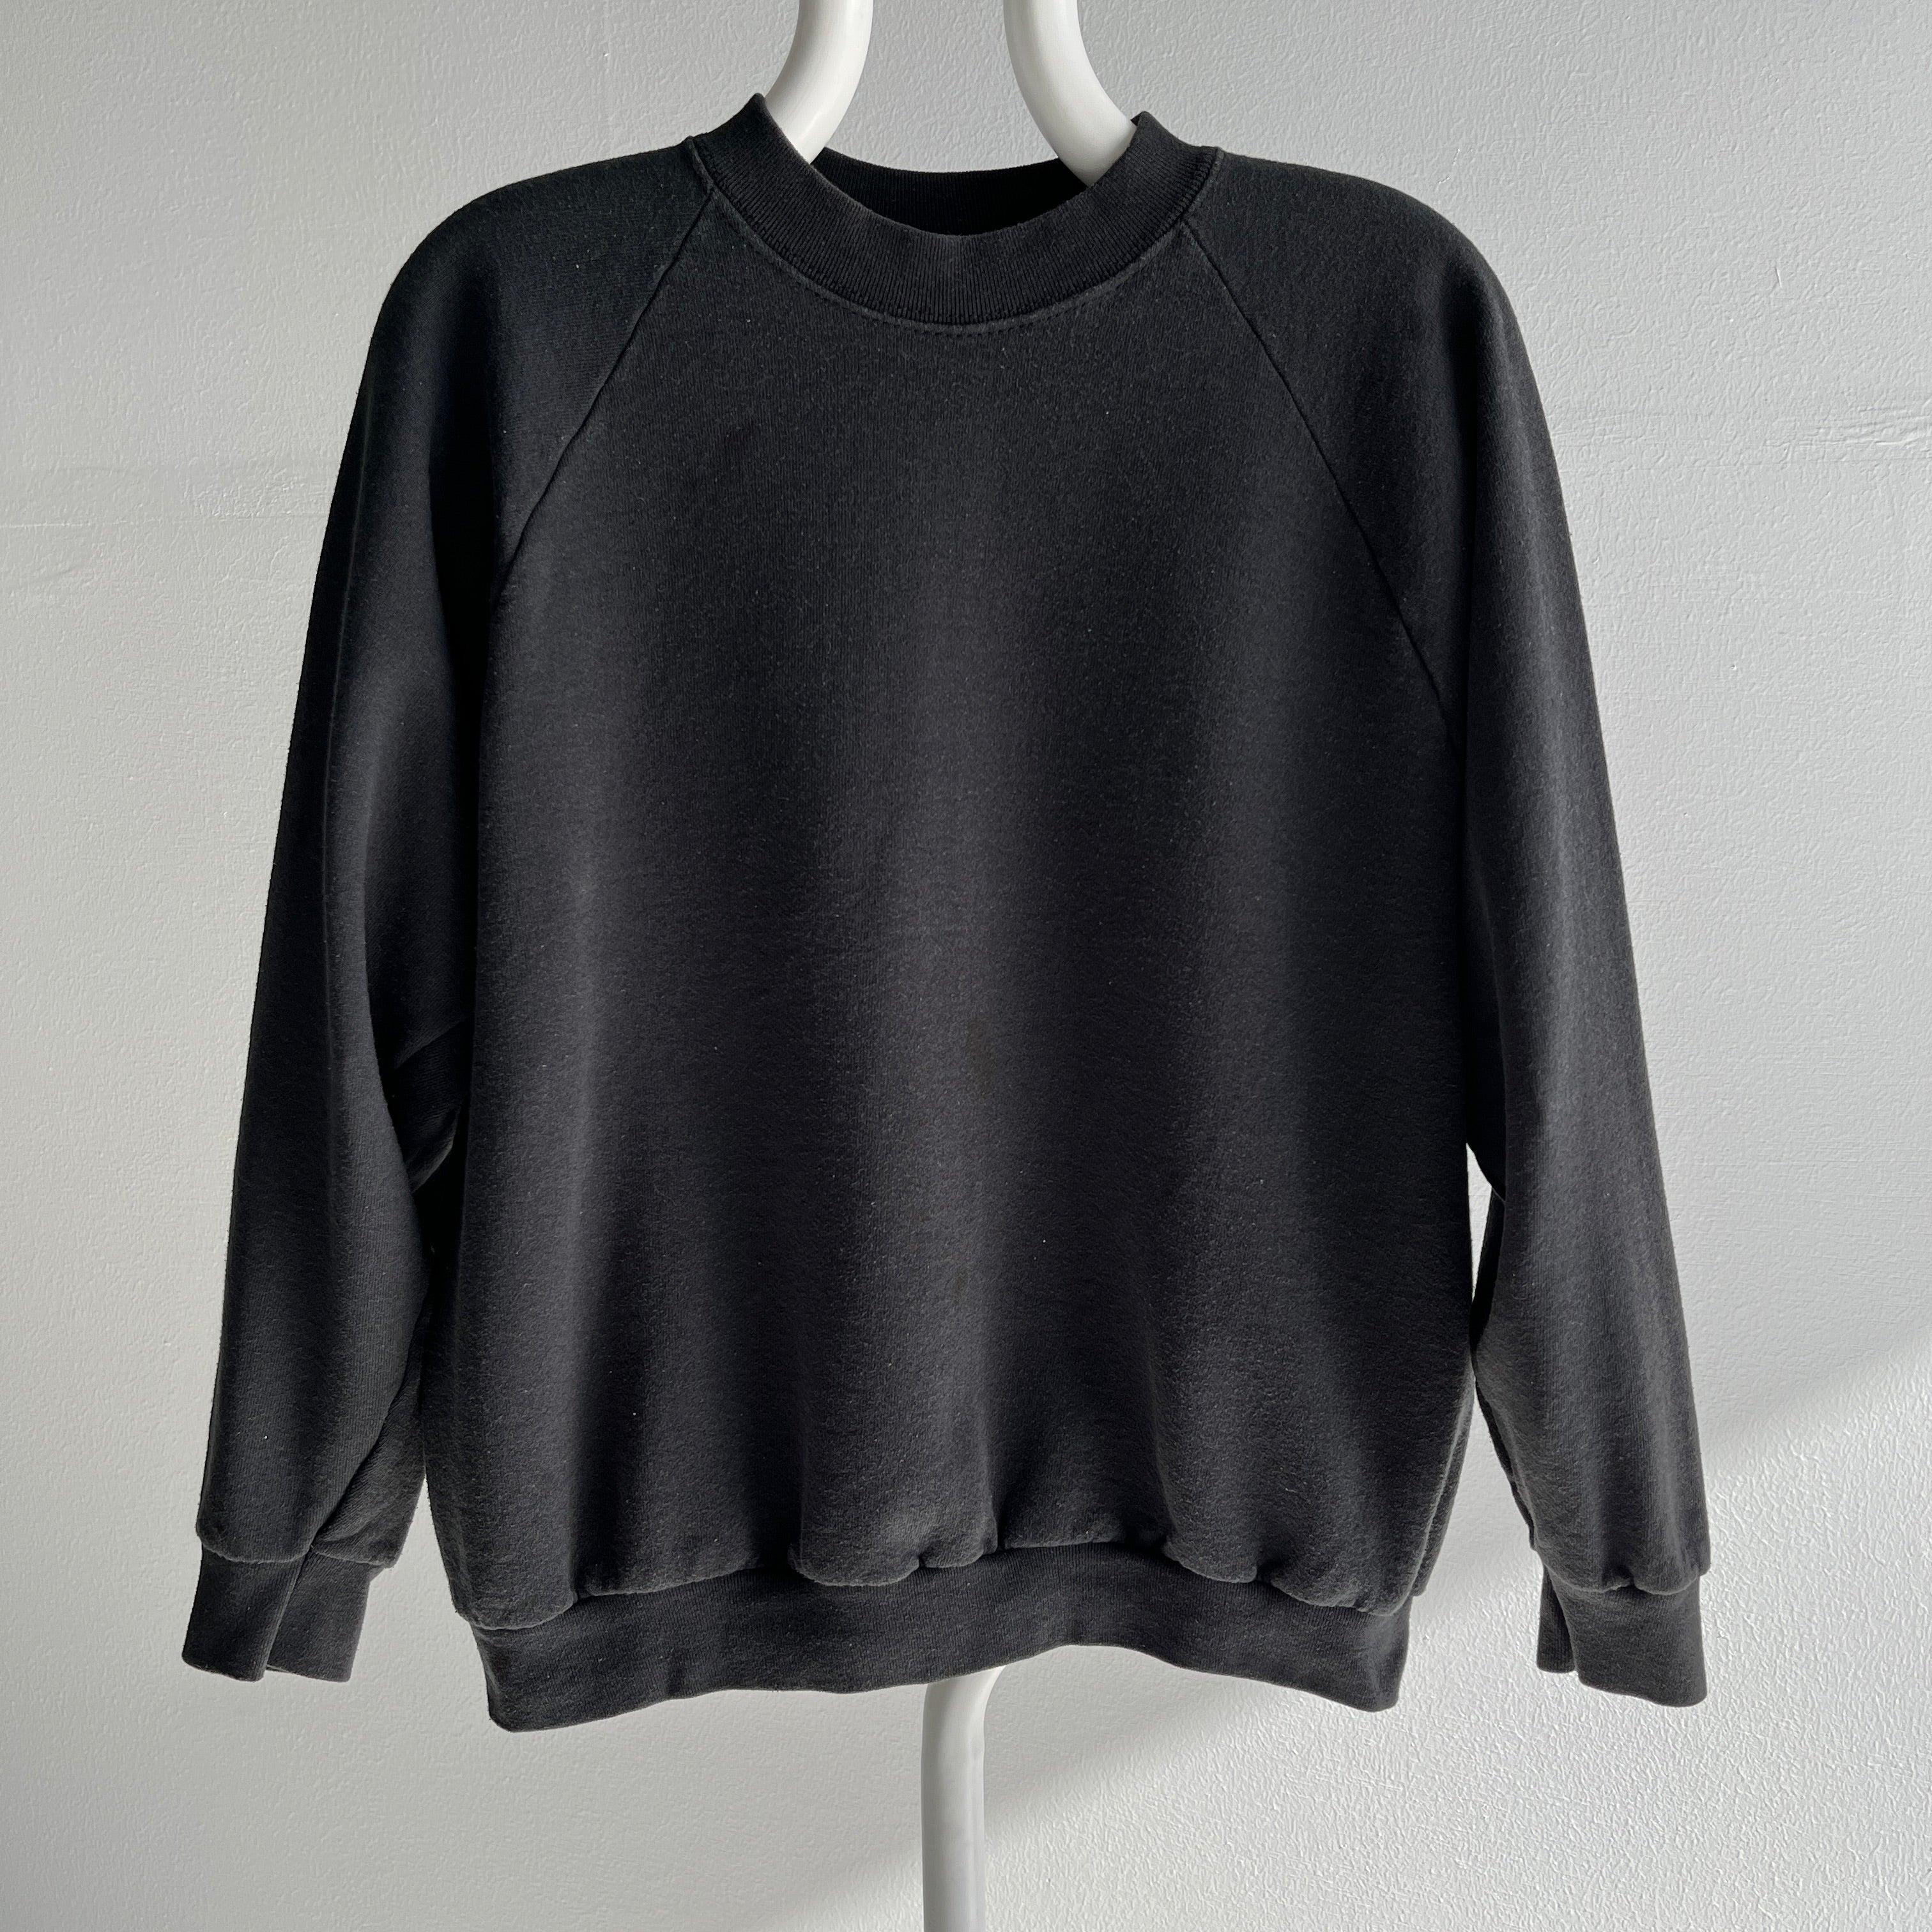 1980s FOTL Blank Black Sweatshirt with Staining and Wear